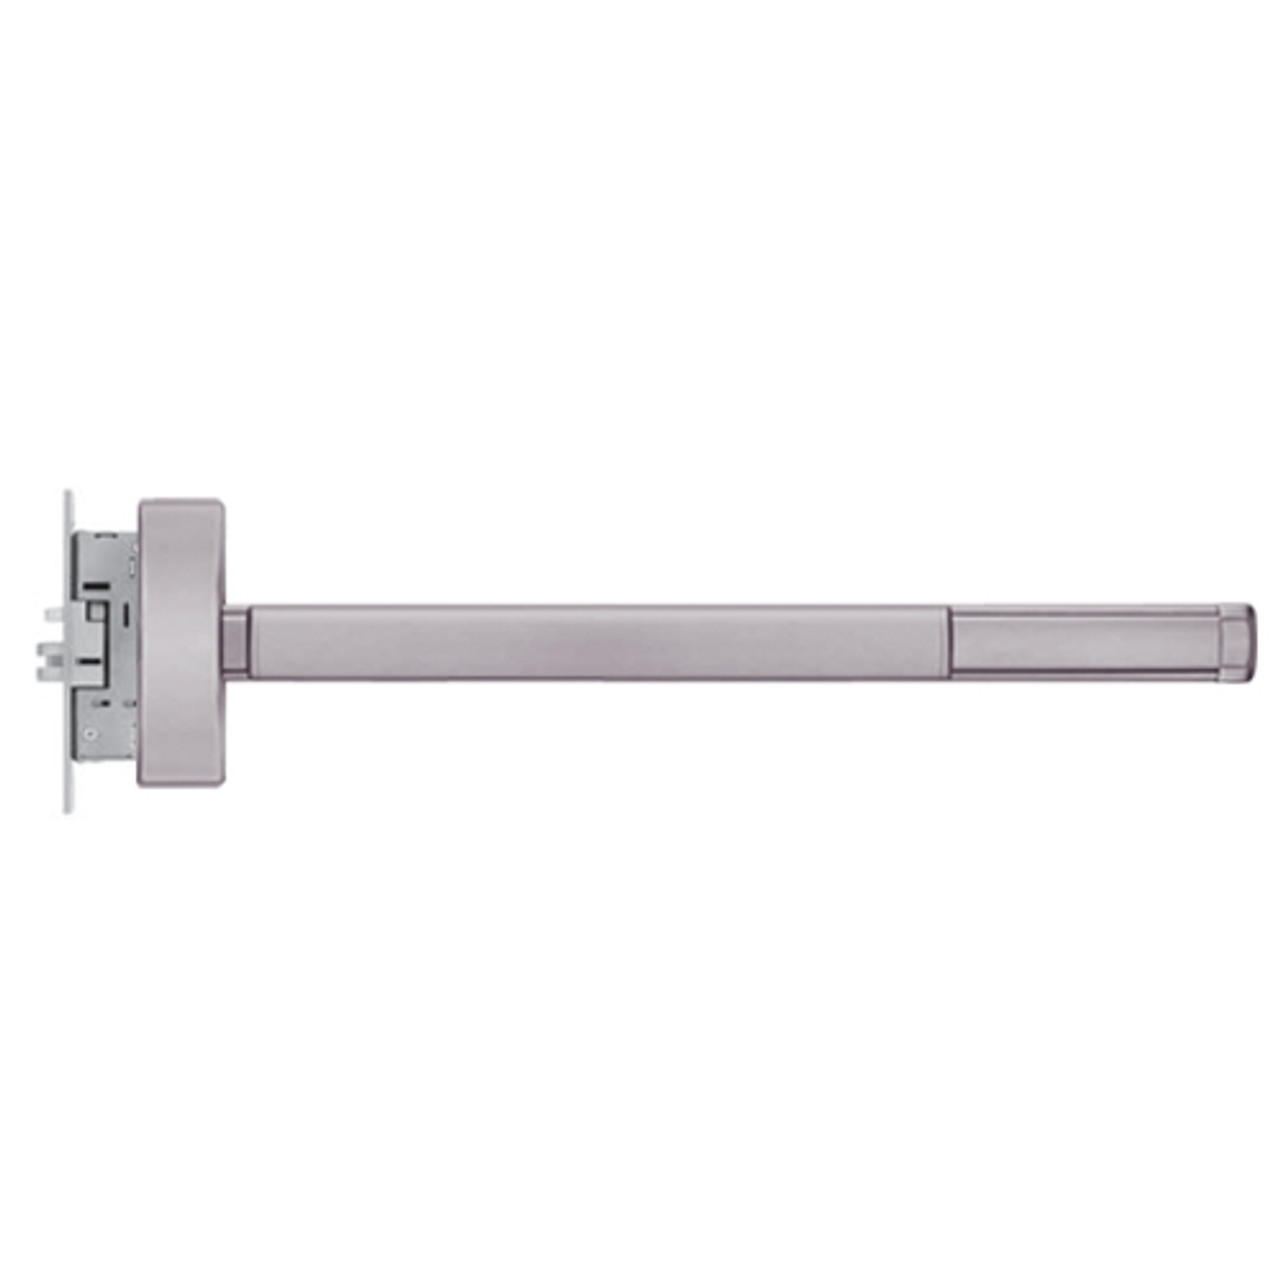 MLRFL2308-RHR-630-36 PHI 2300 Series Fire Rated Apex Mortise Exit Device with Motorized Latch Retraction Prepped for Key Controls Lever/Knob in Satin Stainless Steel Finish